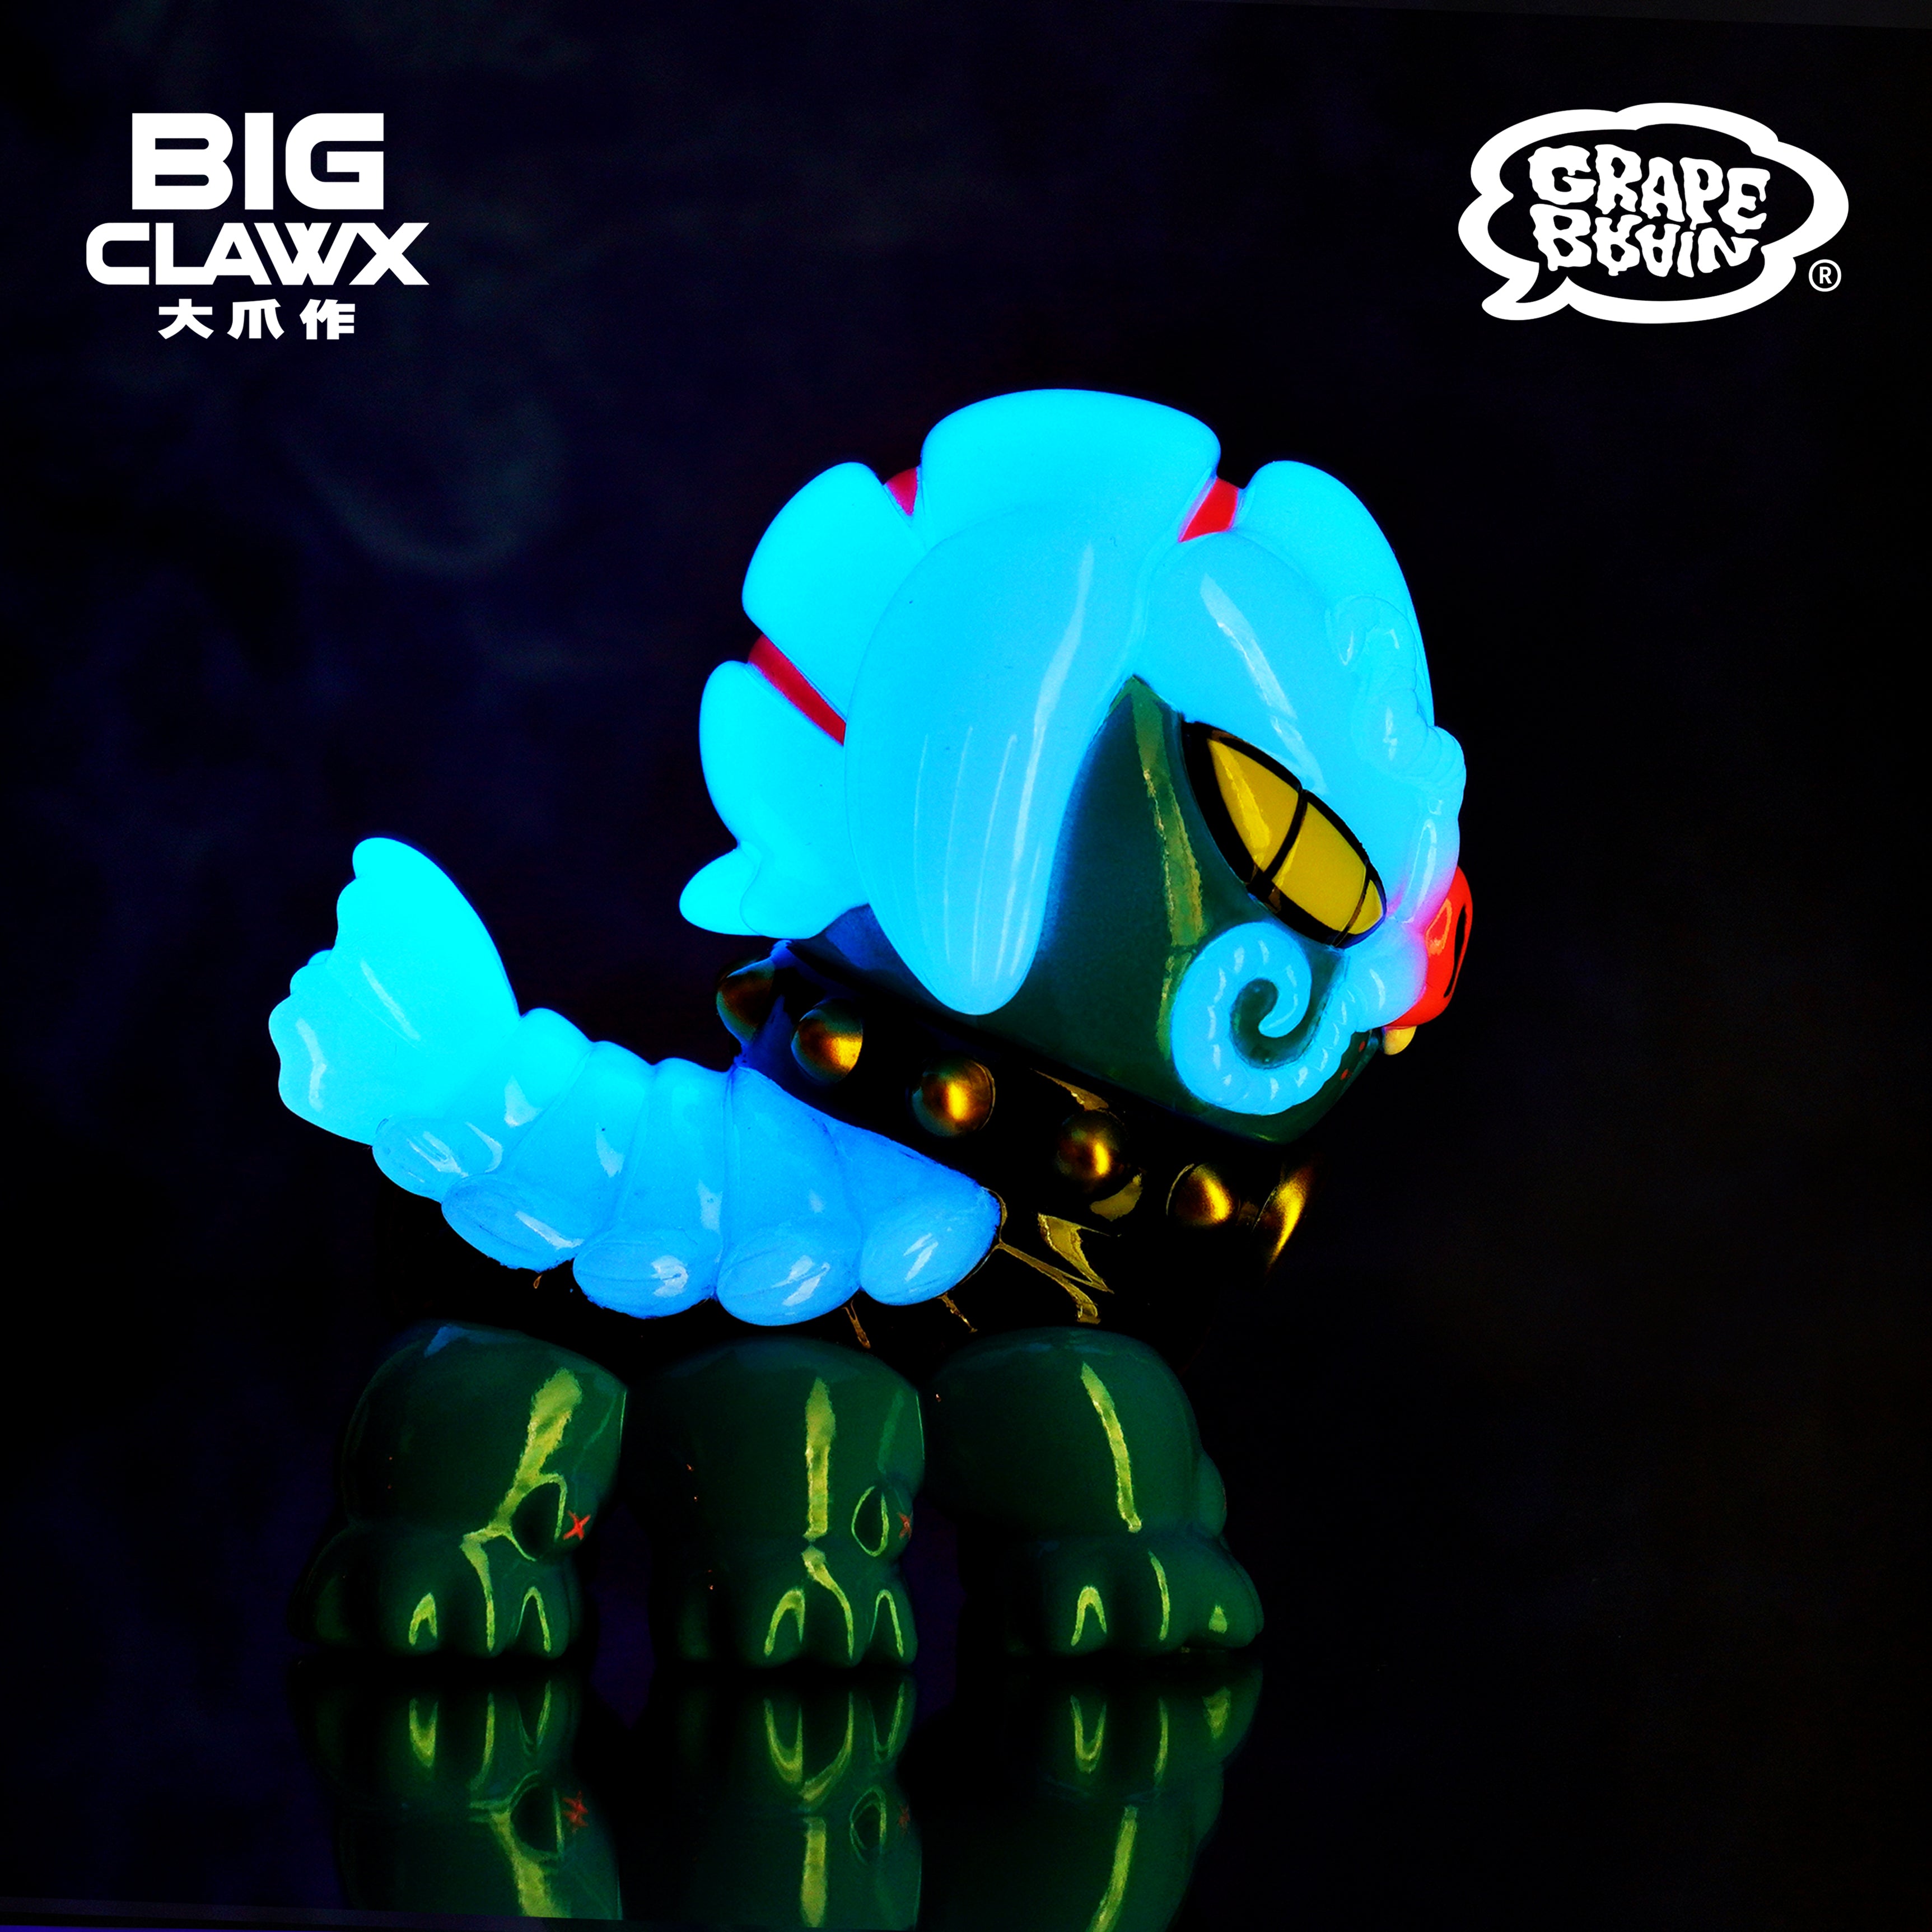 A toy with glowing tail, green skull, and yellow object by BigClaw x Grape Brain.